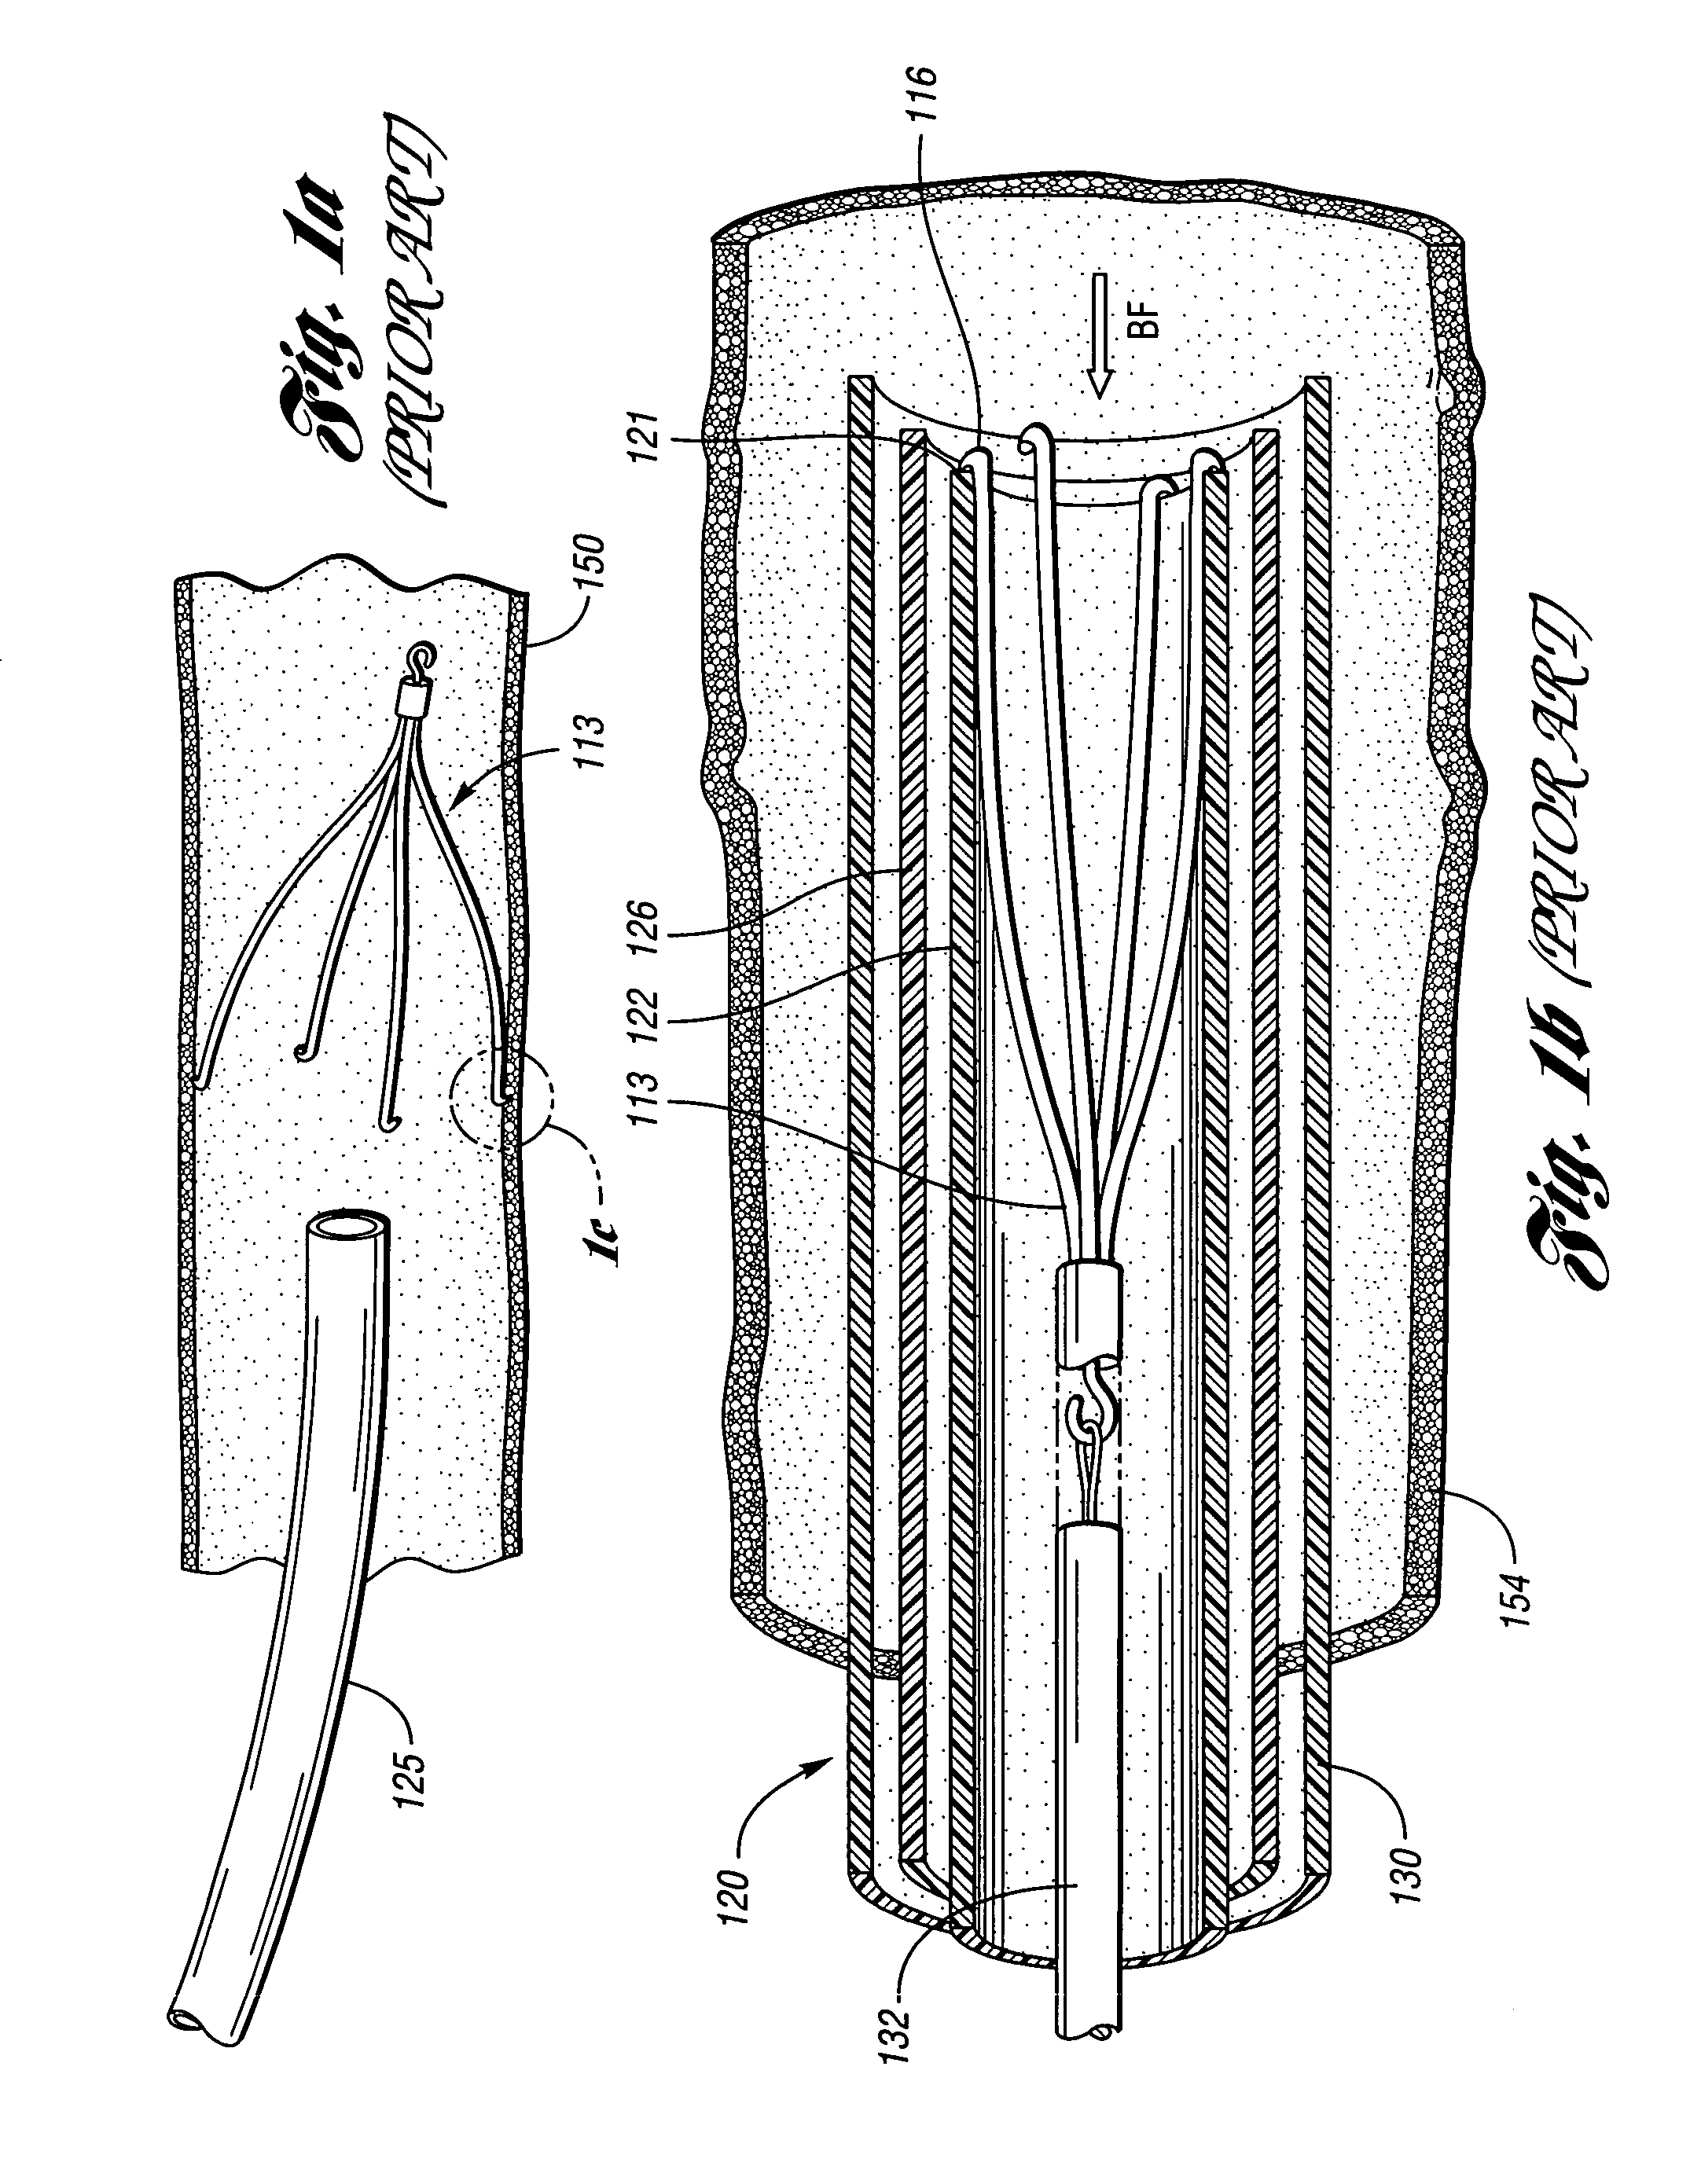 Removable vena cava filter having inwardly positioned anchoring hooks in collapsed configuration